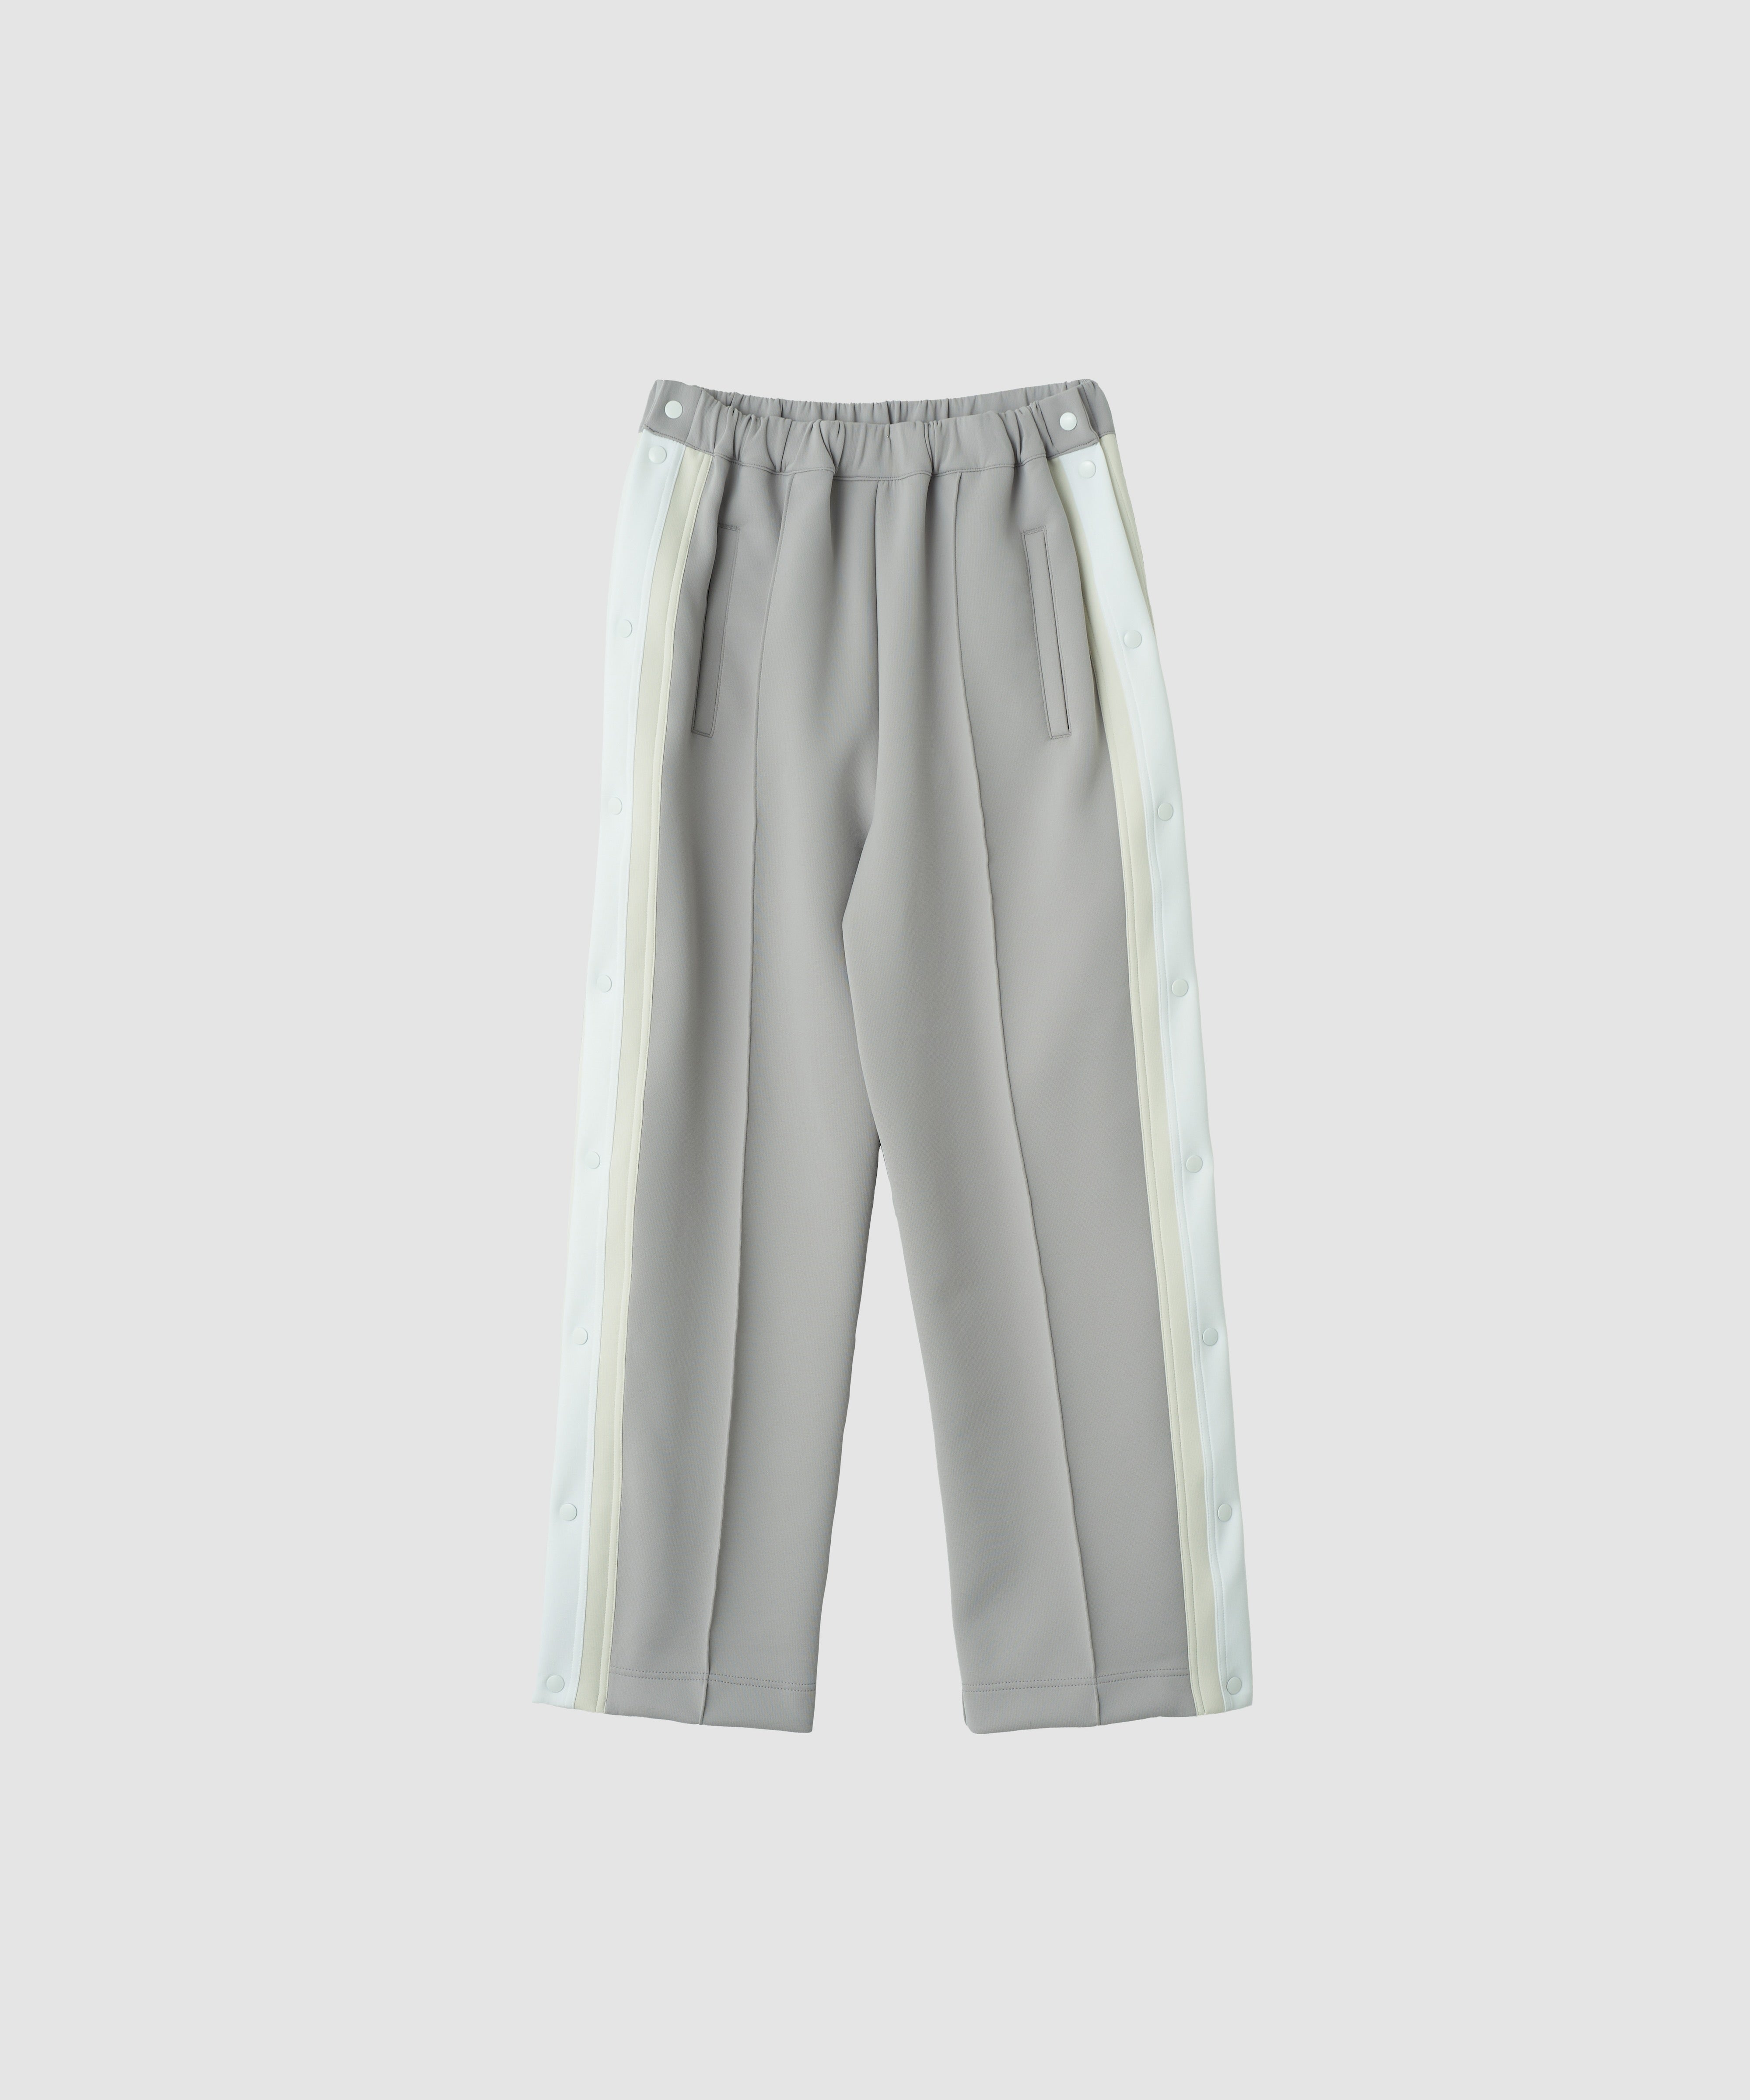 POLYESTER JERSEY SIDE OPEN PANTS